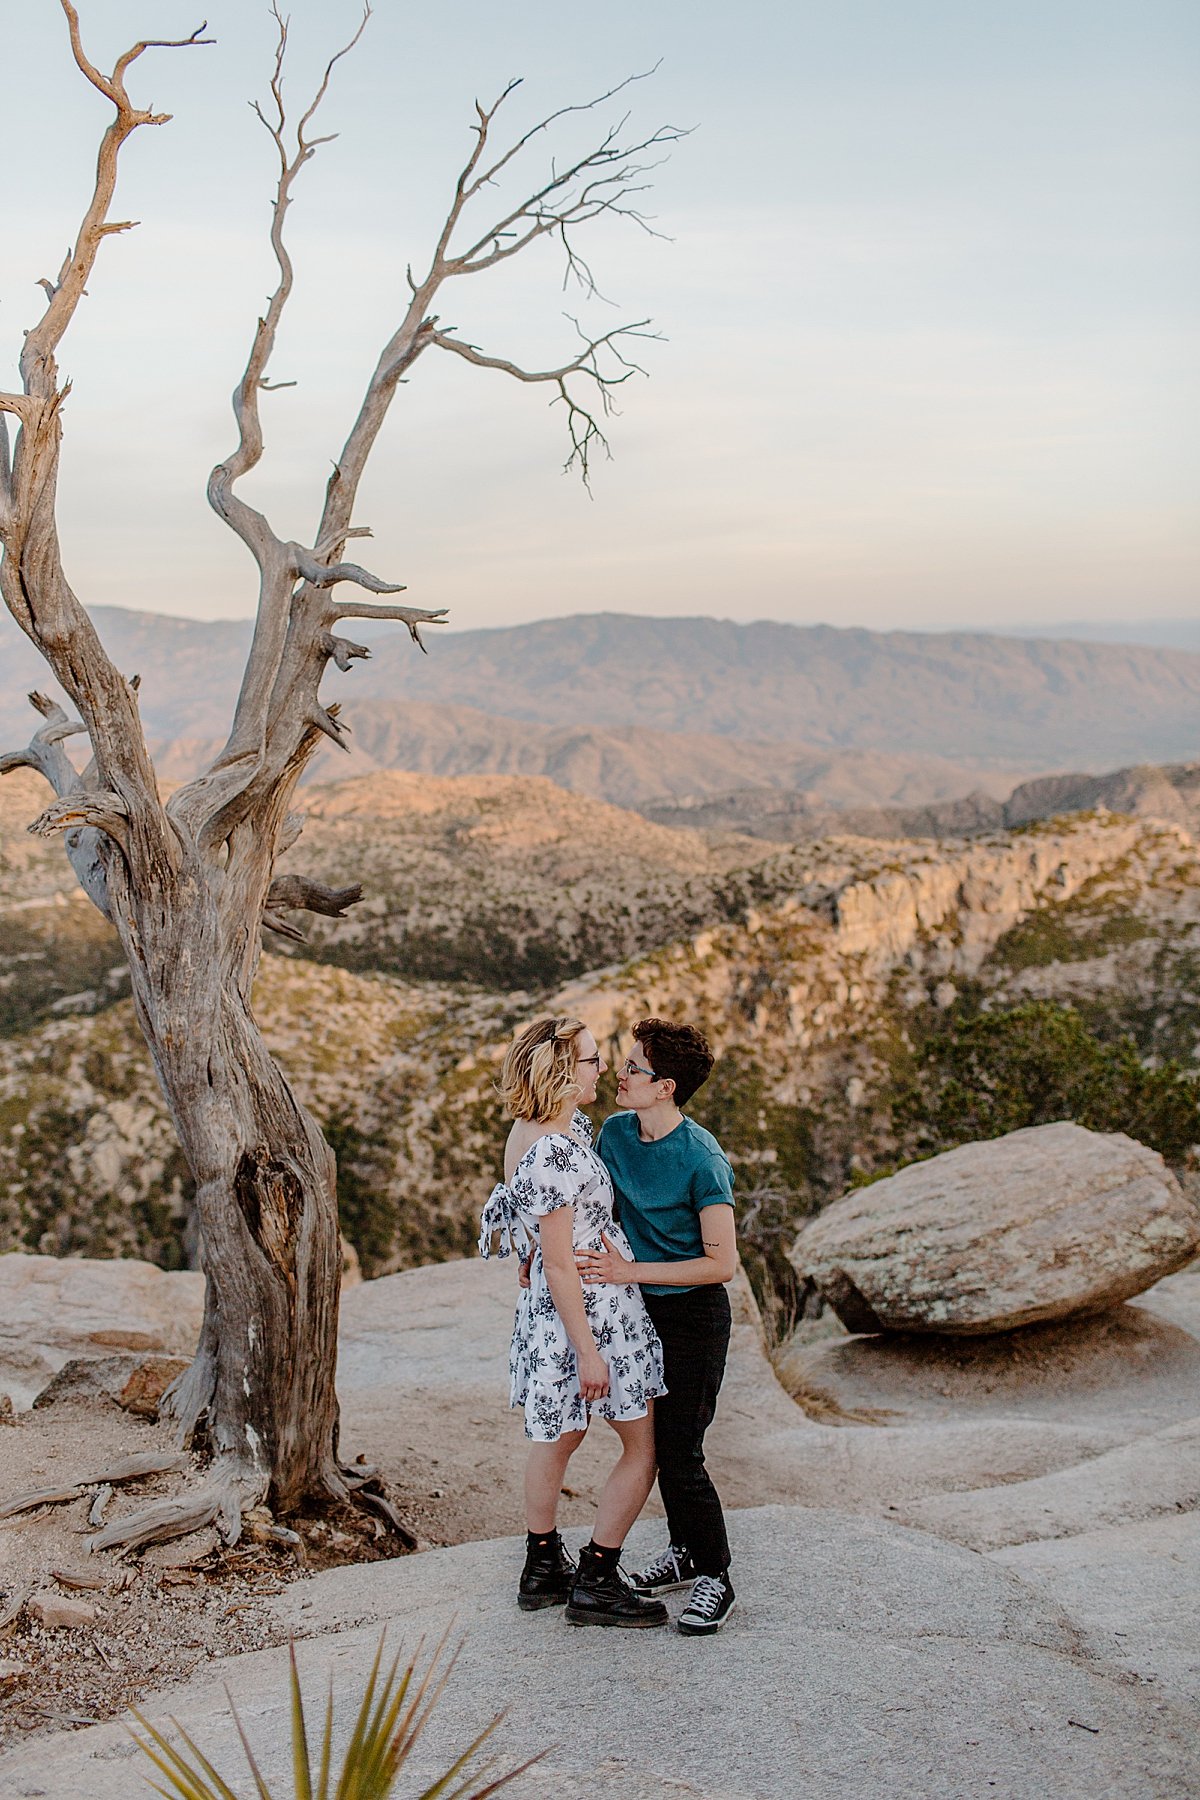  Girls holding hands standing under tree at Mount Lemmon by Lucy Bouman photography  